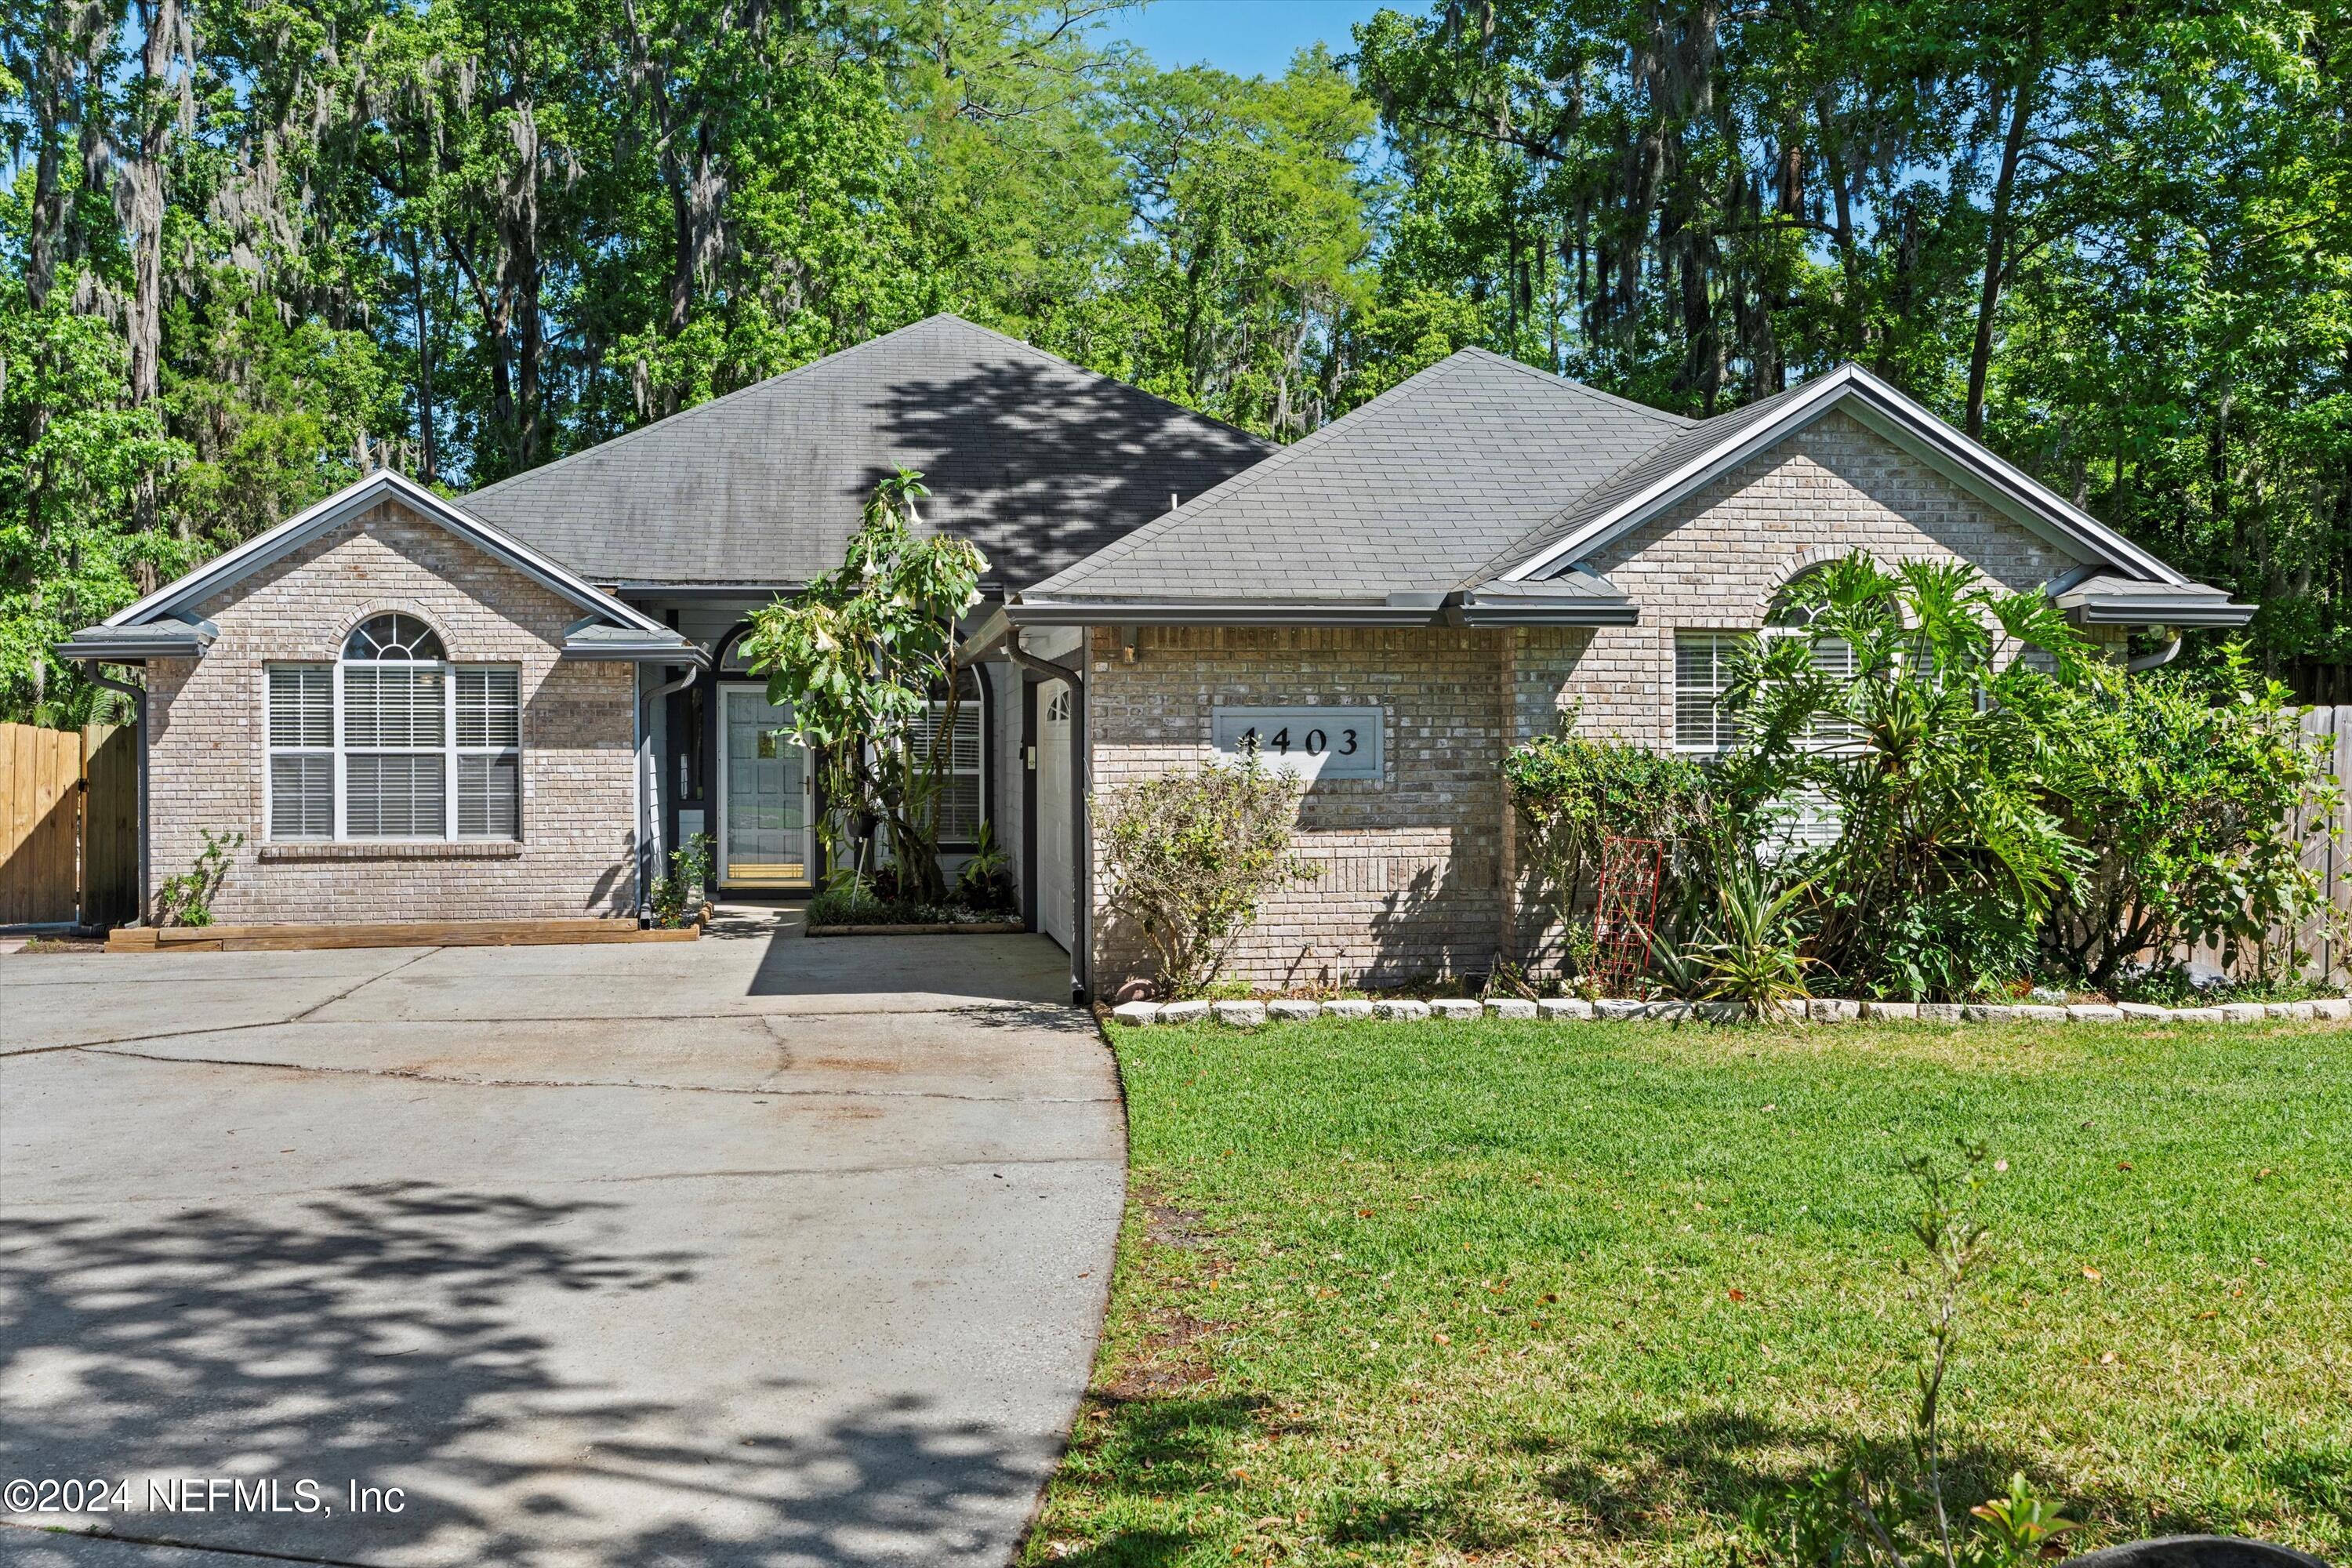 Jacksonville, FL home for sale located at 4403 Apple Tree Place, Jacksonville, FL 32258